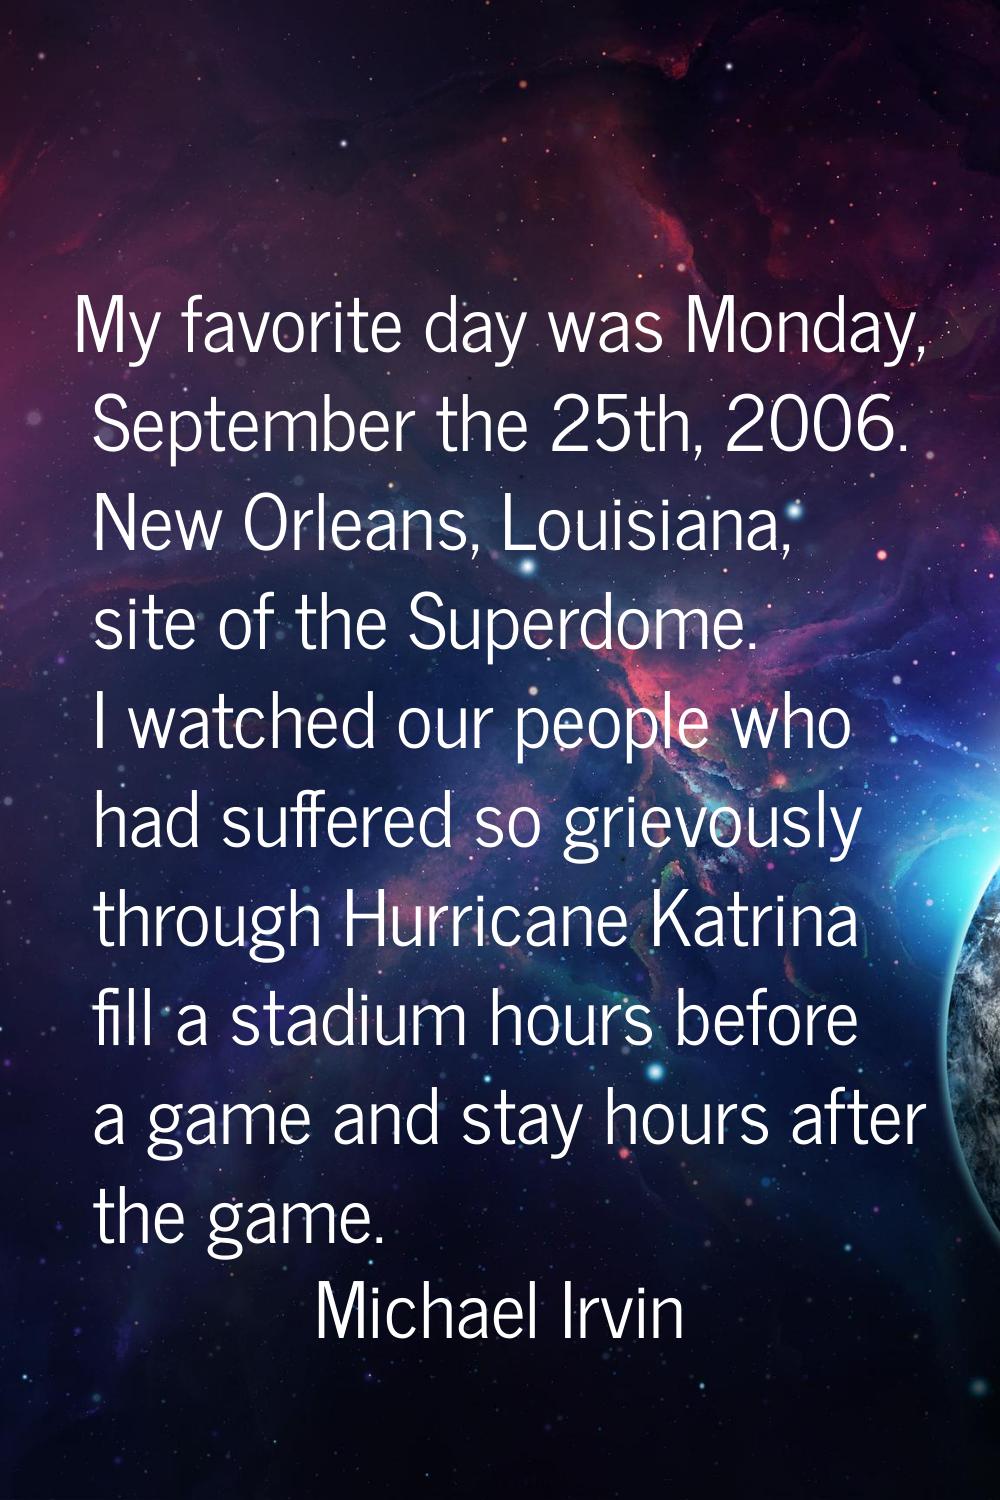 My favorite day was Monday, September the 25th, 2006. New Orleans, Louisiana, site of the Superdome